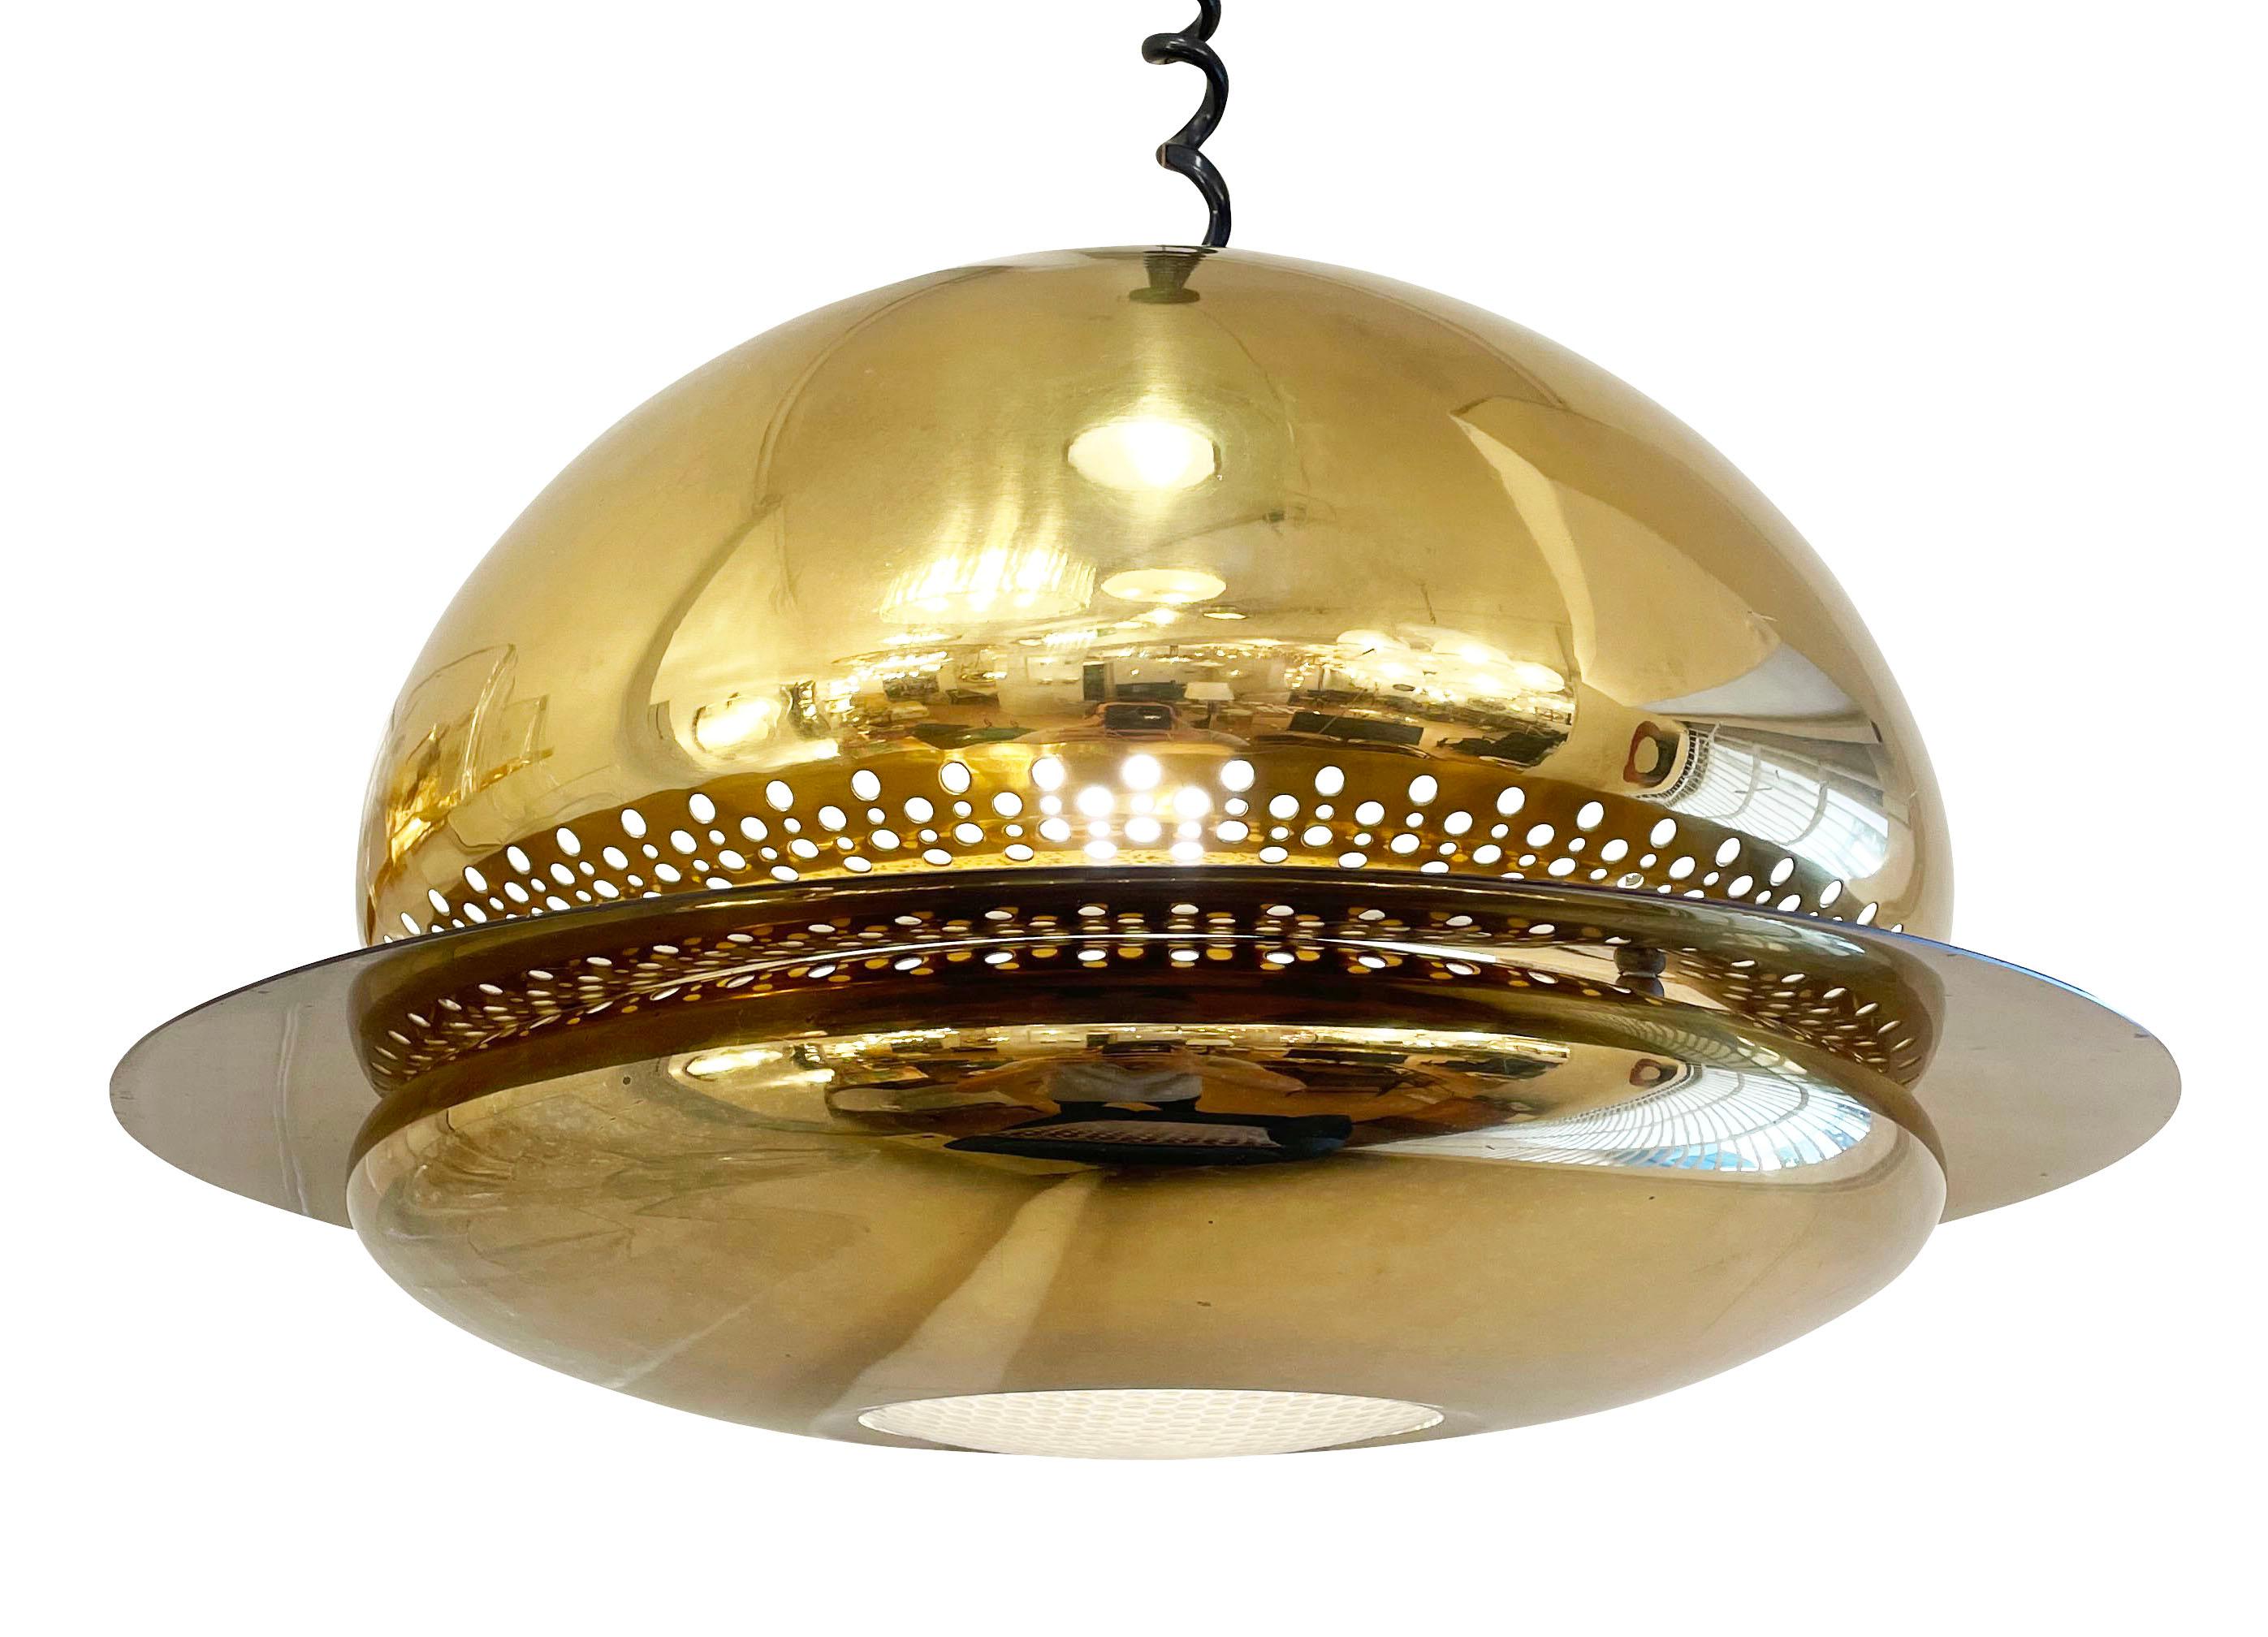 Nictea Pendant designed by Afra e Tobia Scarpa for Flos in 1971. Features an aged brass perforated frame with an optical glass lens at the bottom. Marked. Holds one E26 socket and height is adjustable.

Condition: 
Good vintage condition, minor